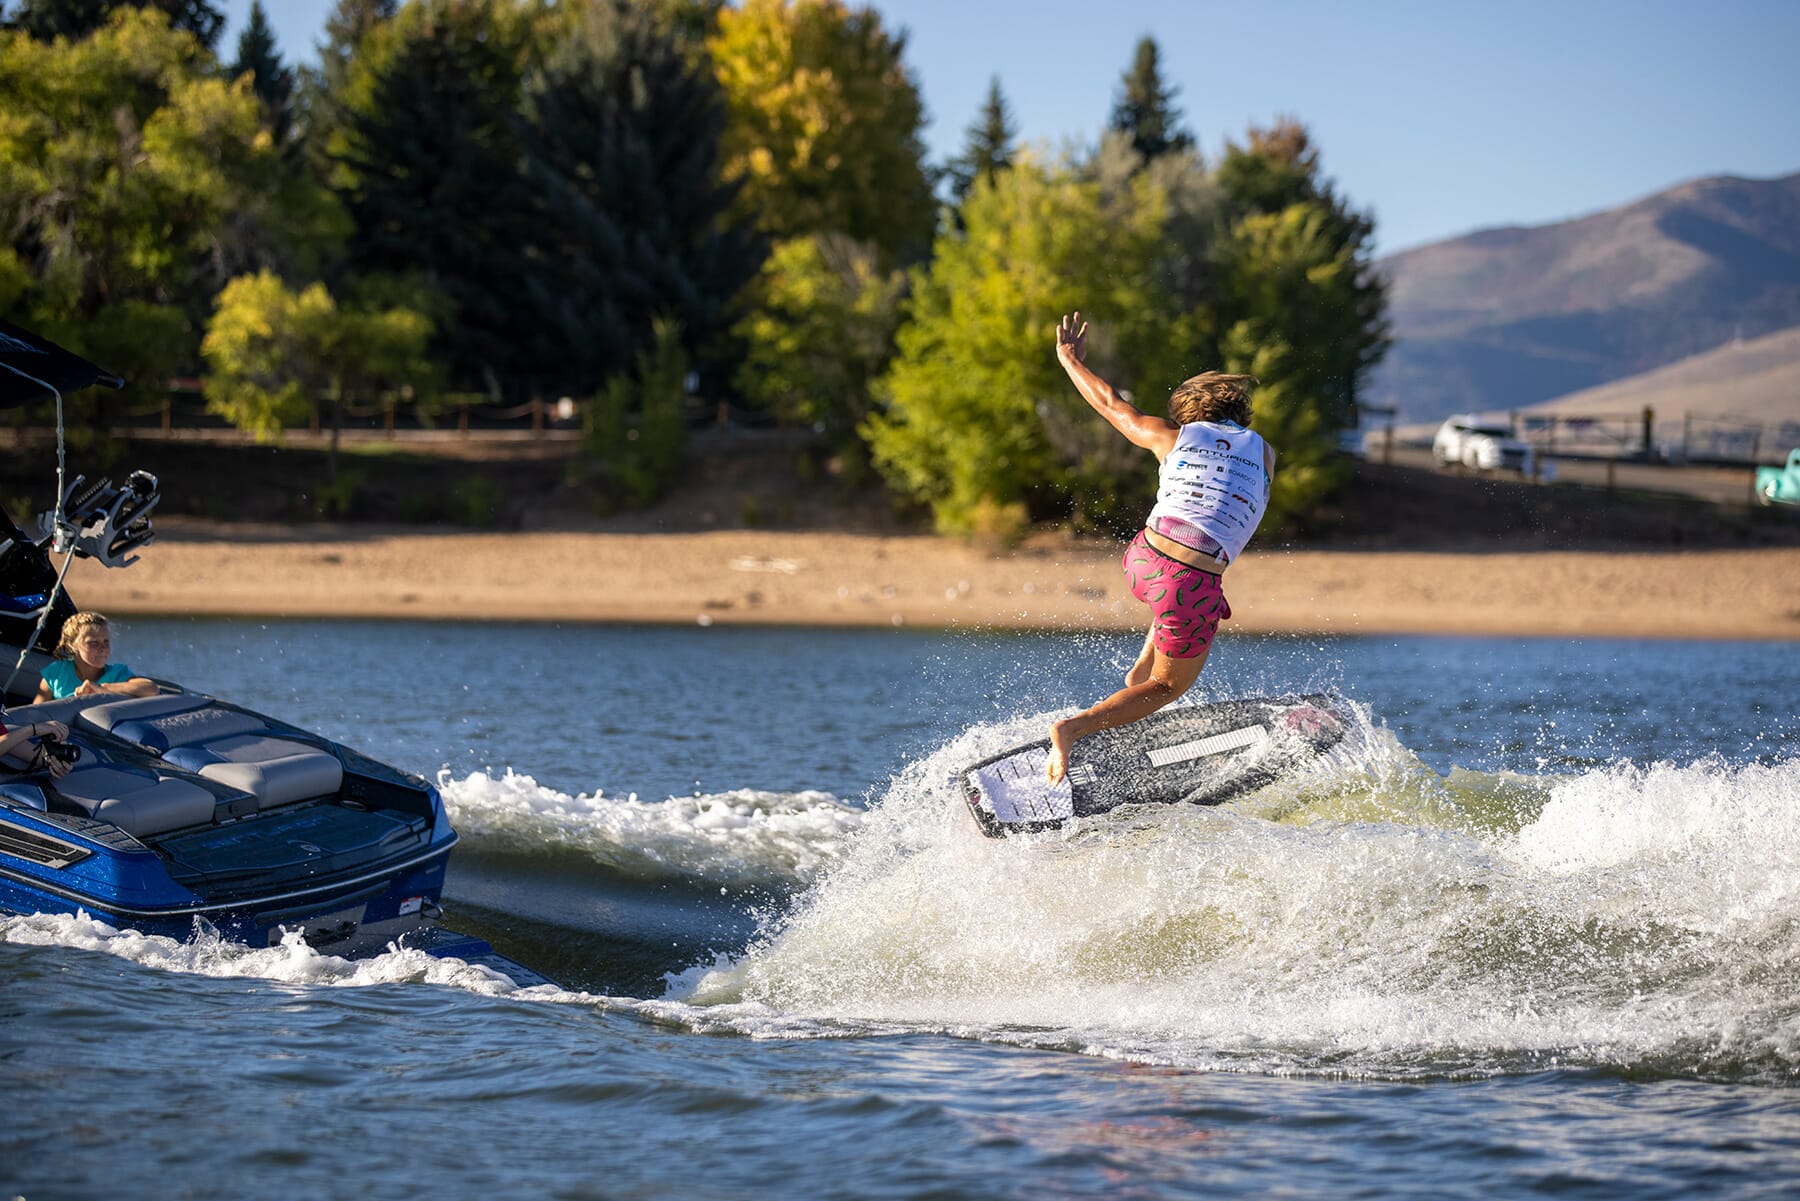 A man is wakeboarding.